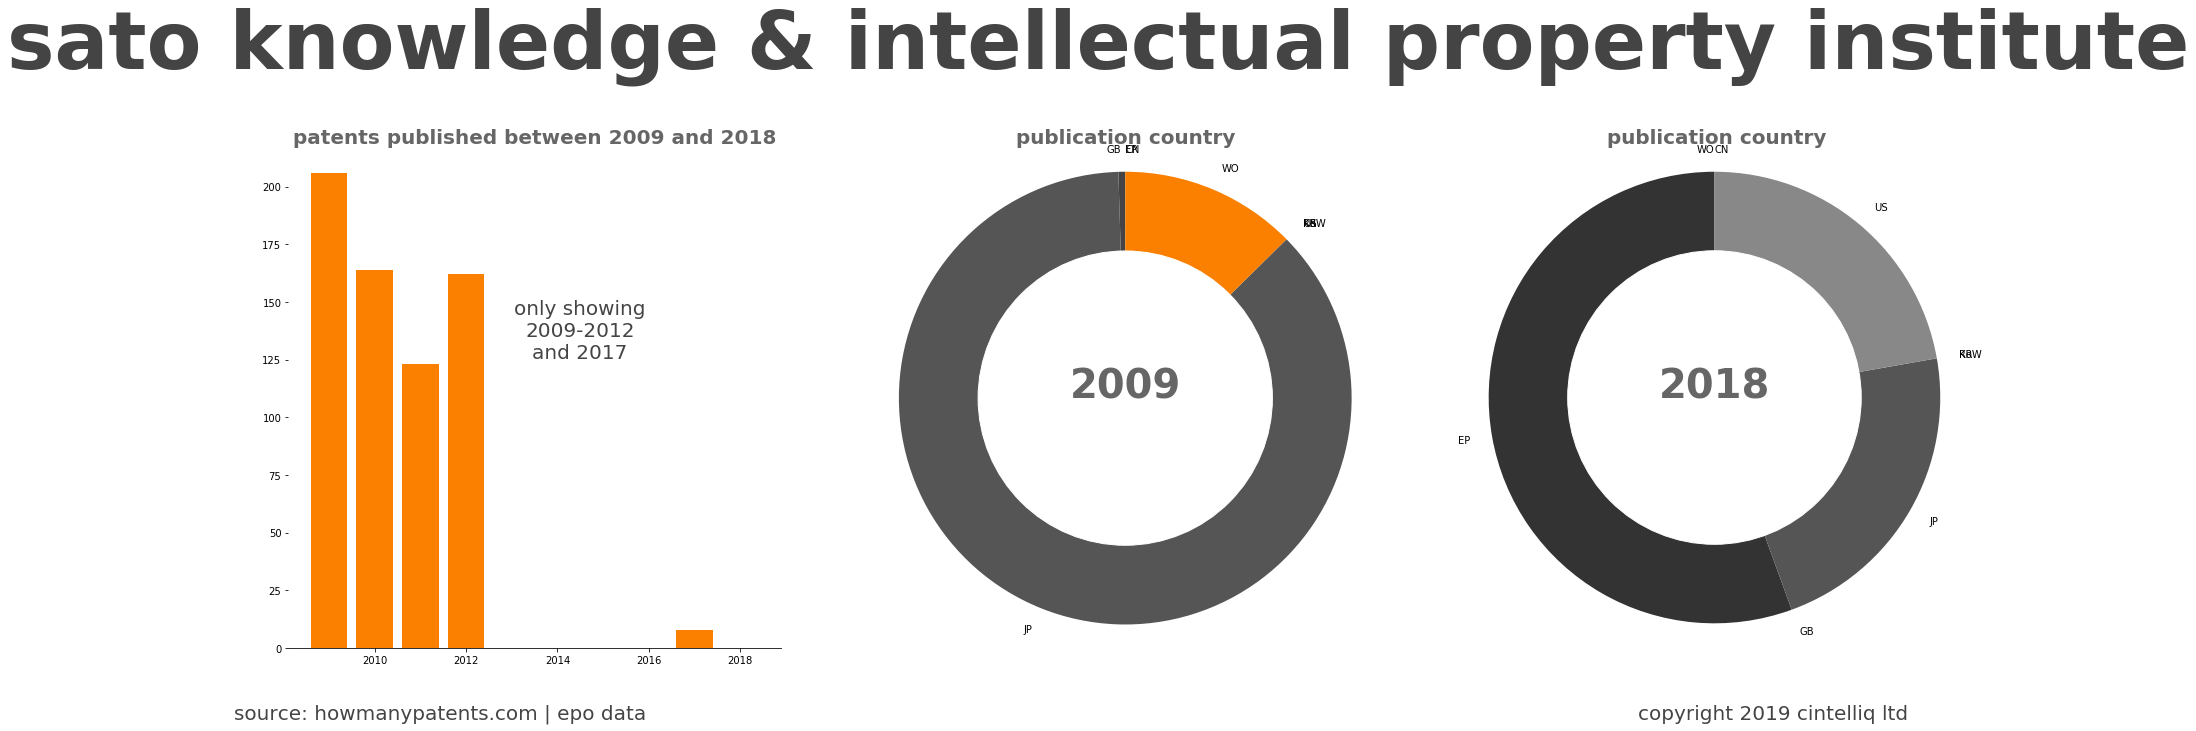 summary of patents for Sato Knowledge & Intellectual Property Institute